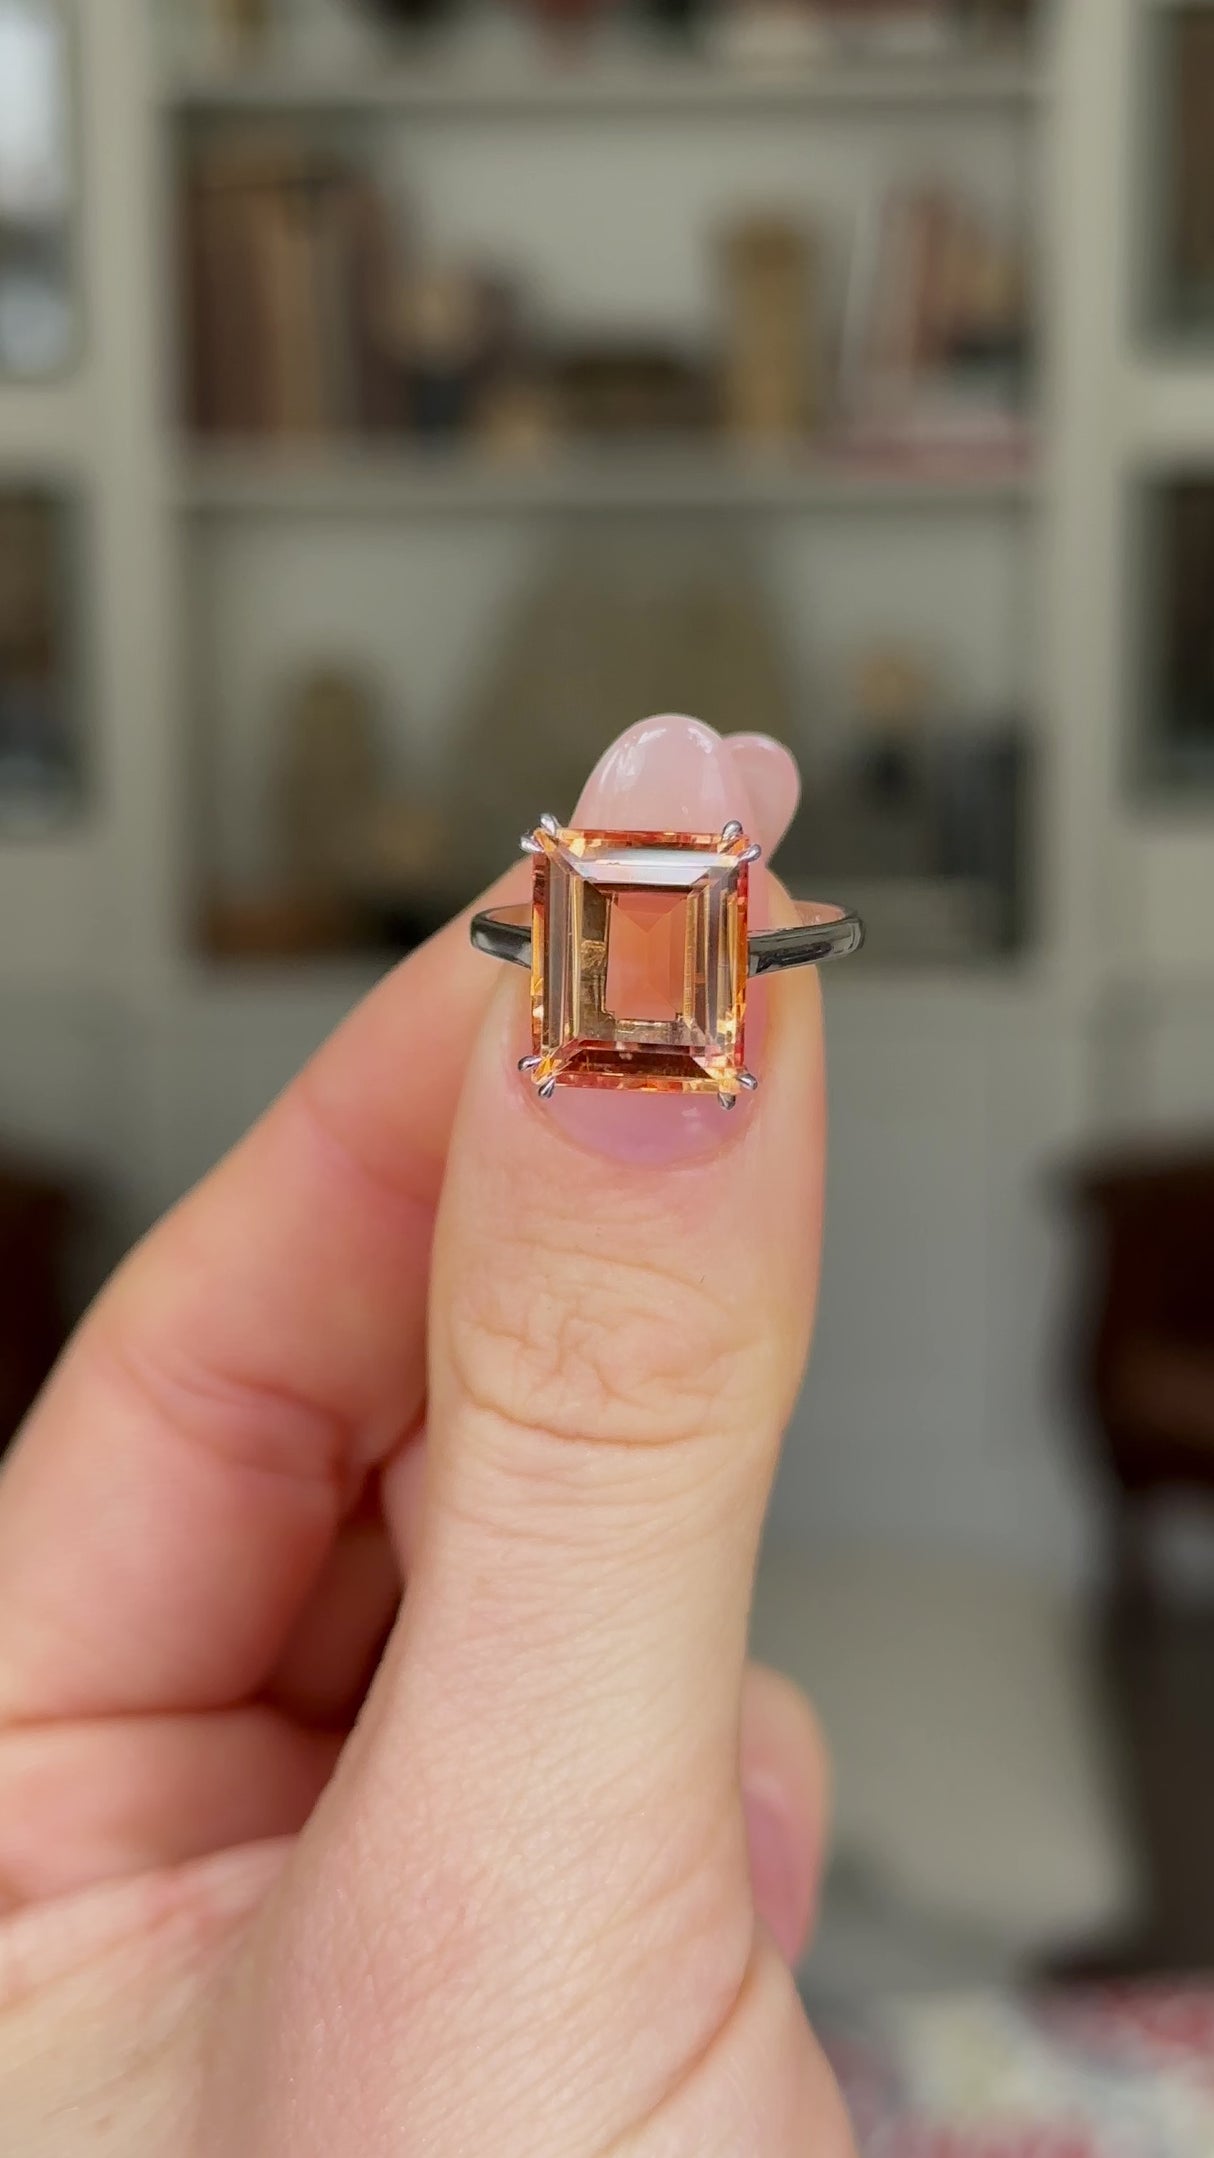 Vintage, Imperial Topaz Single-Stone Ring, 18ct White Gold held in fingers and rotated to give perspective.